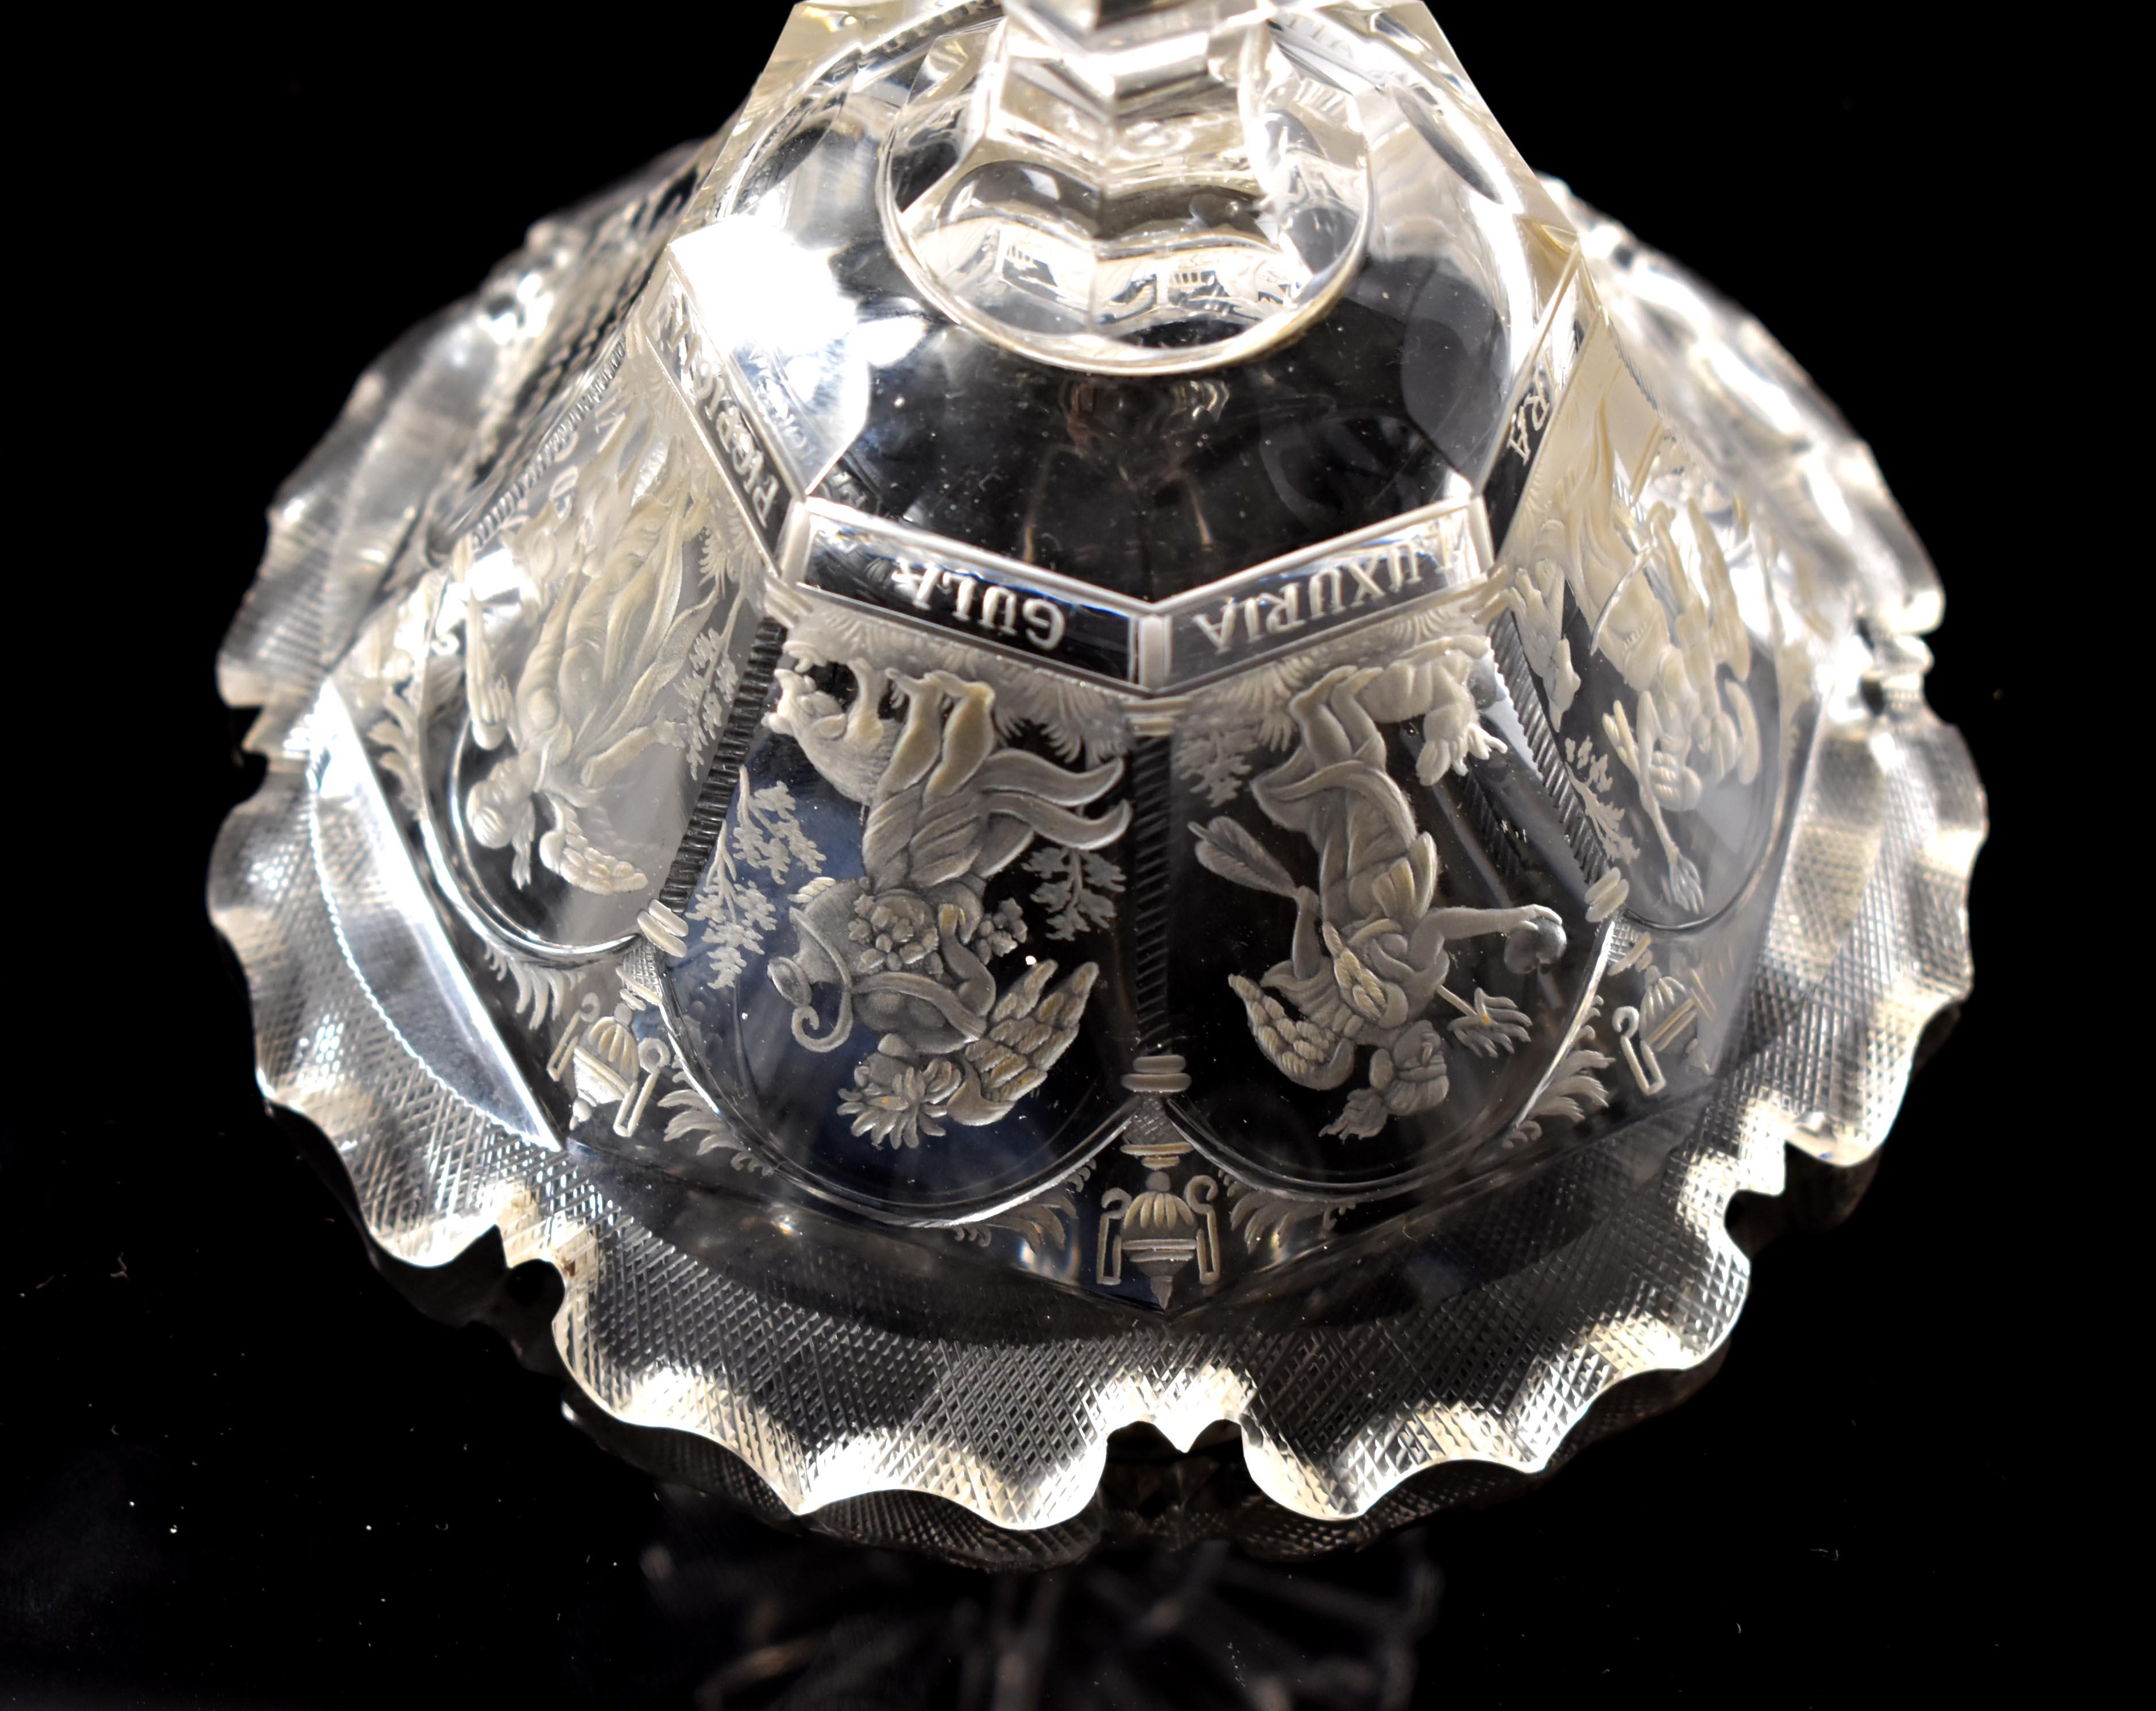 Antique Engraved Goblet-Seven Deadly Sins, Bohemian Glass 19th century  In Good Condition For Sale In Nový Bor, CZ